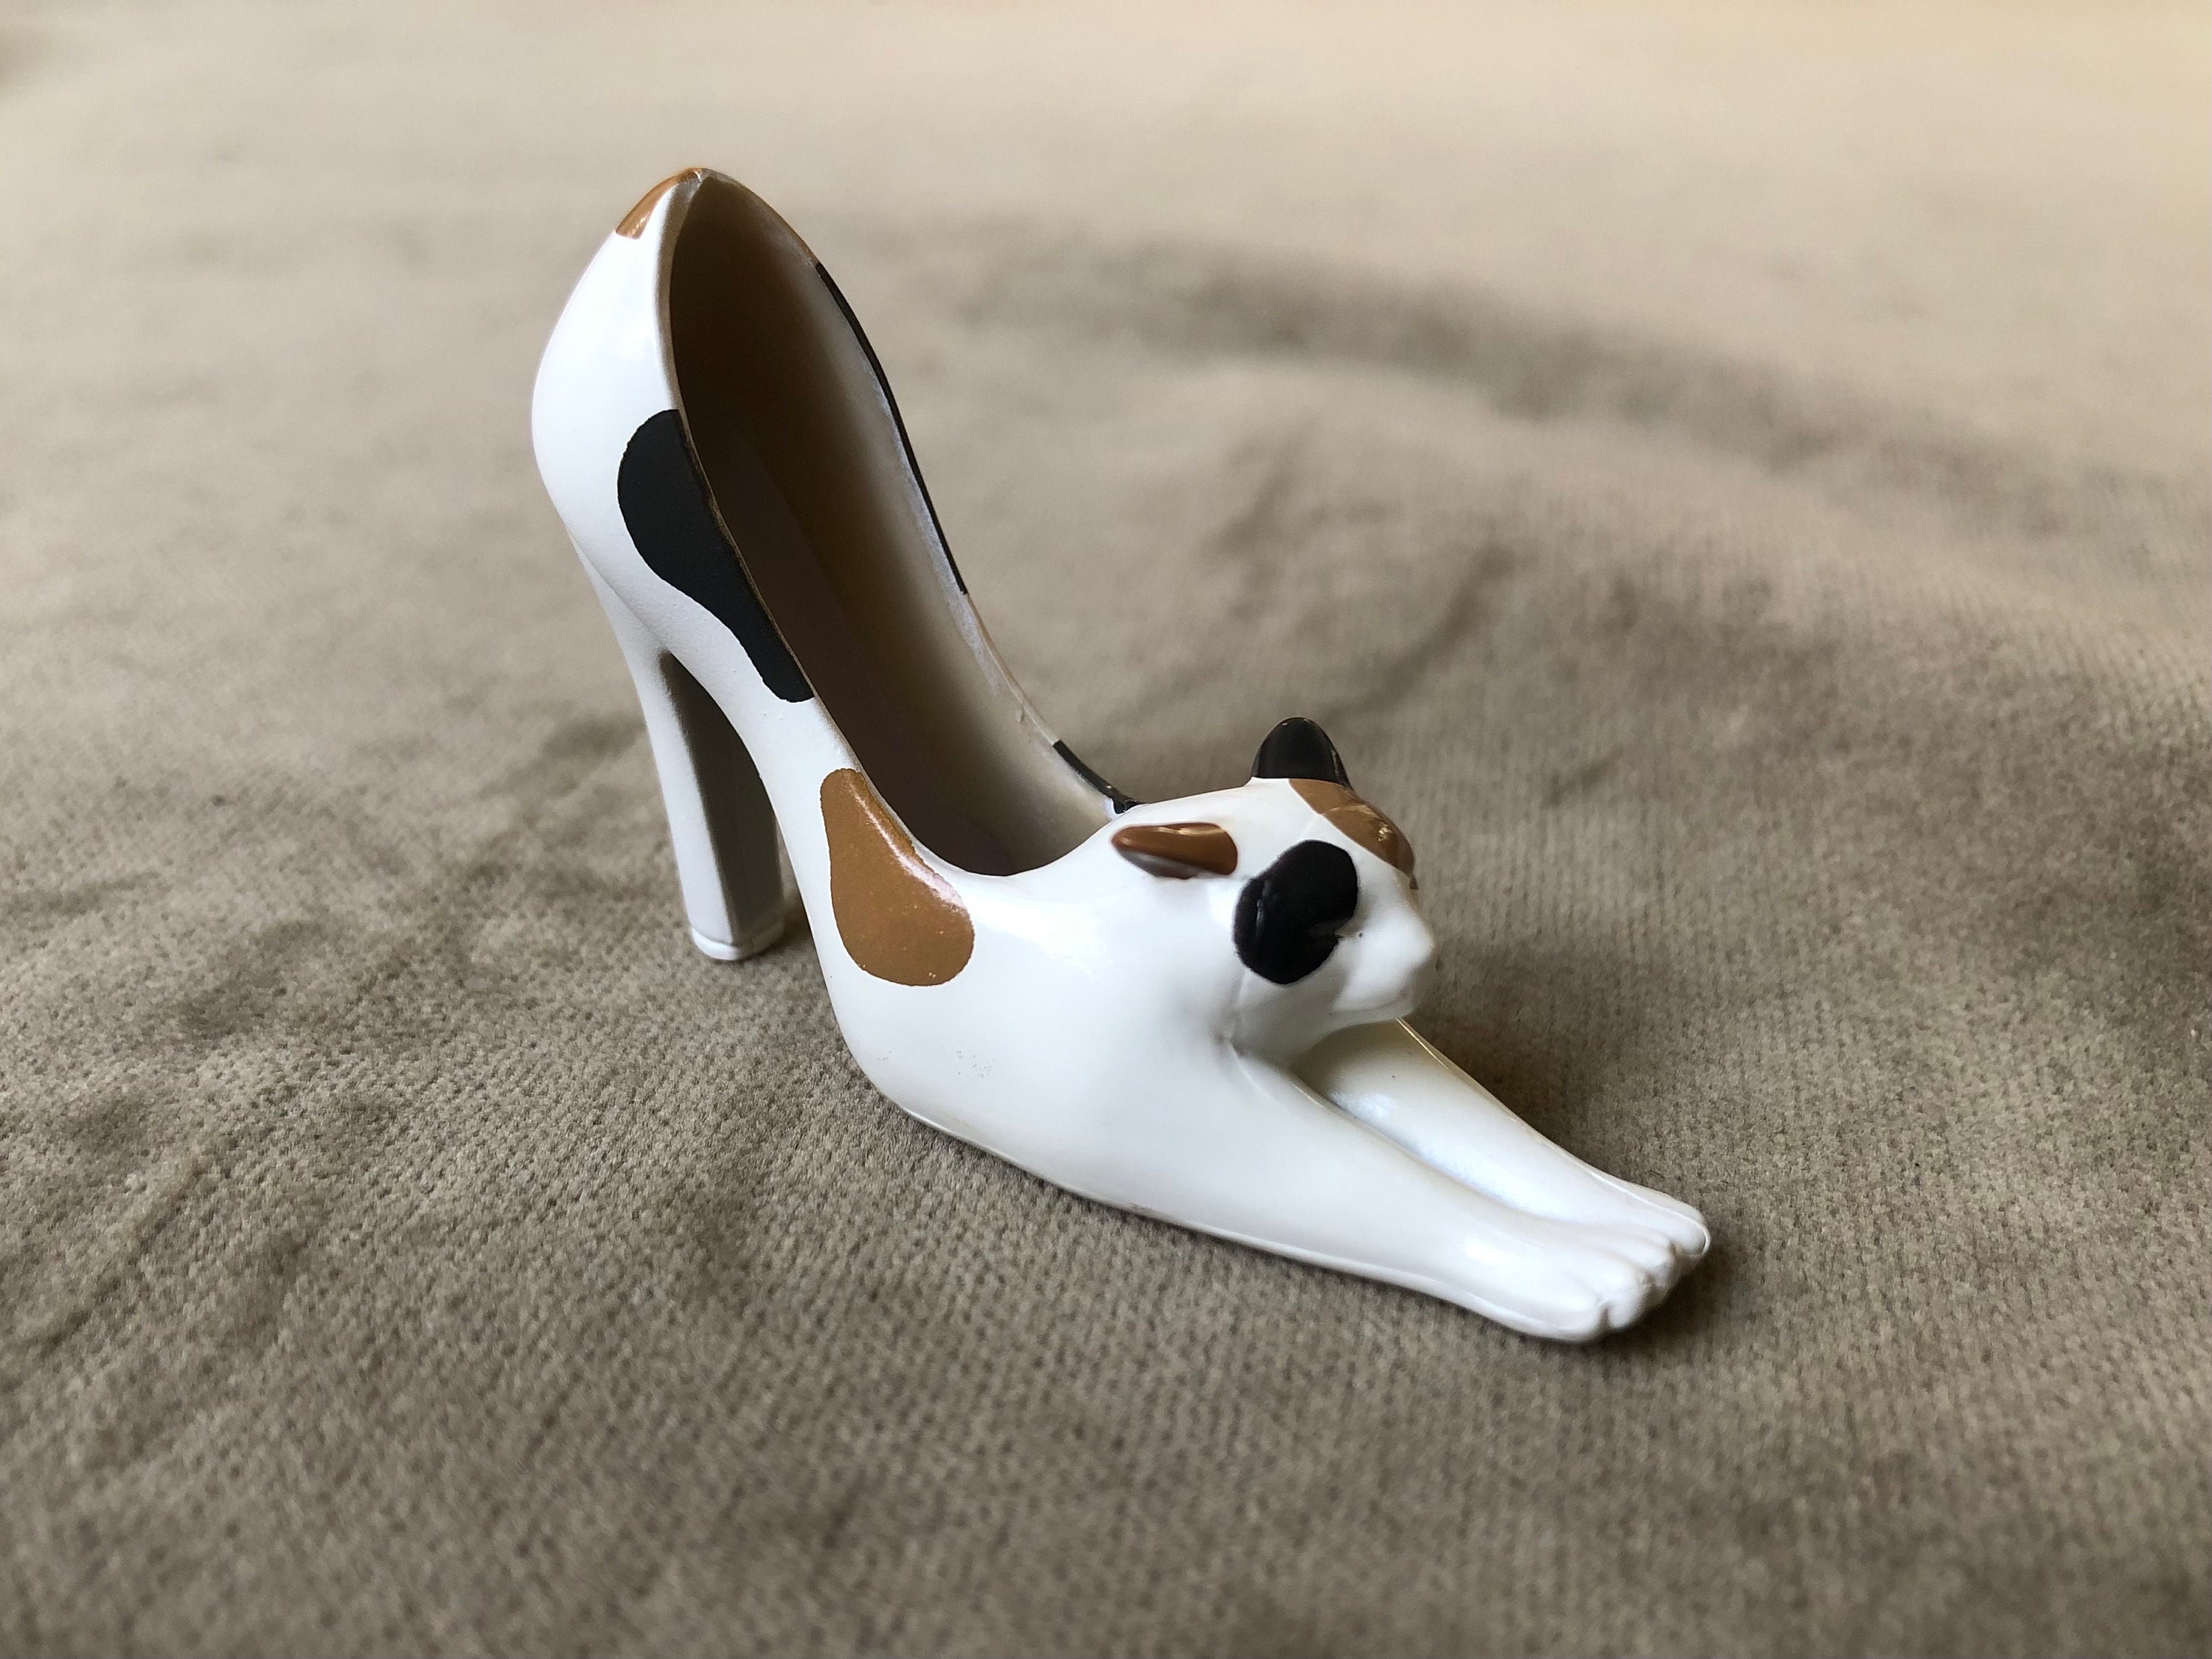 120 Weird Shoes We Didn't Know Existed | Bored Panda